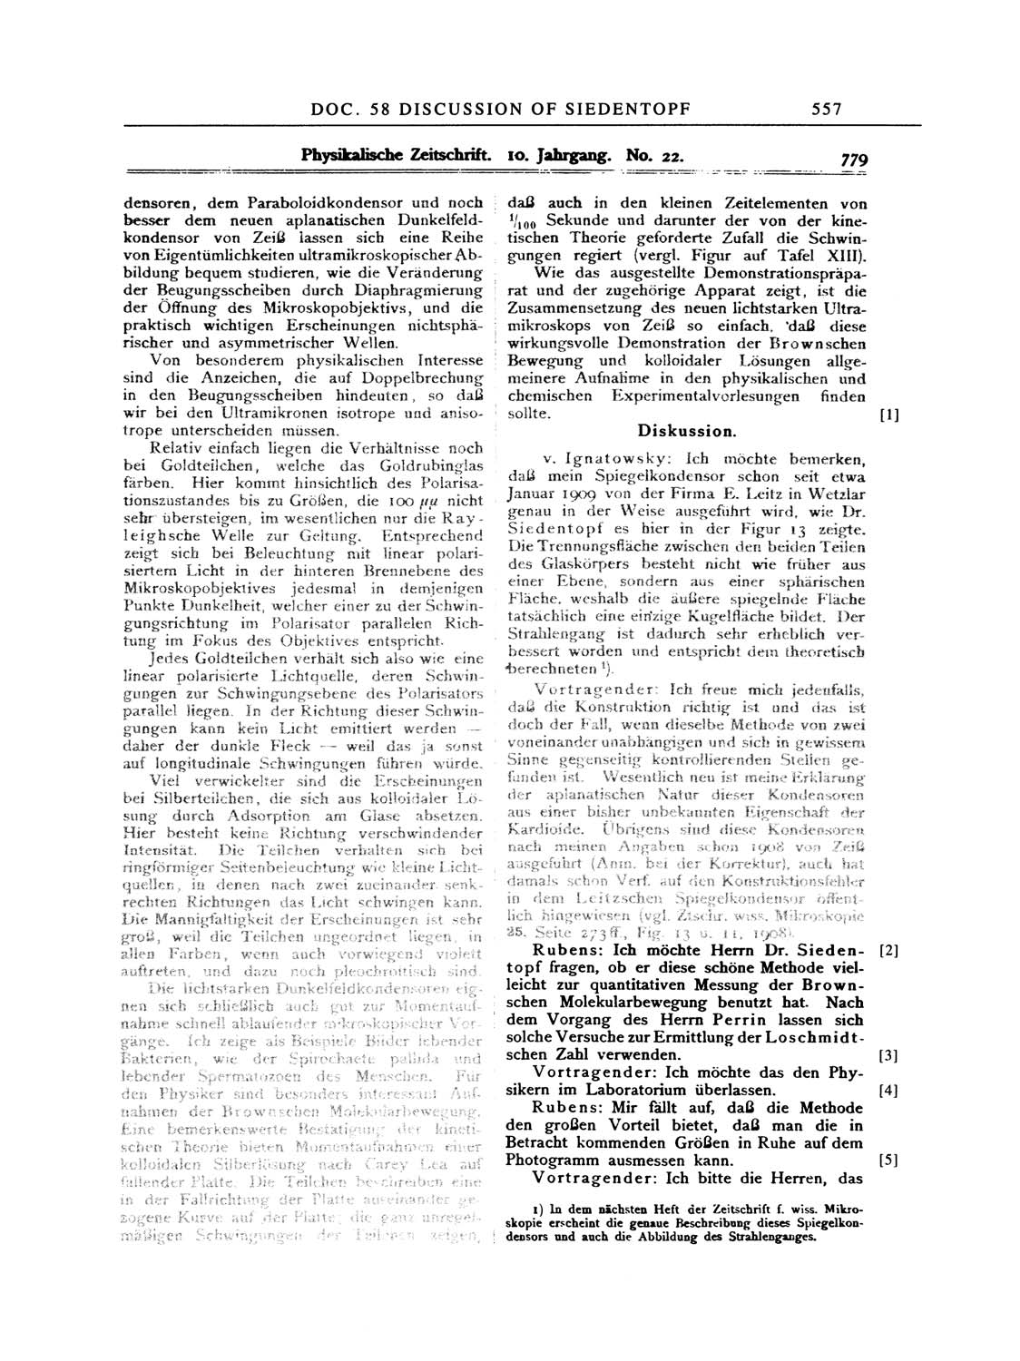 Volume 2: The Swiss Years: Writings, 1900-1909 page 557